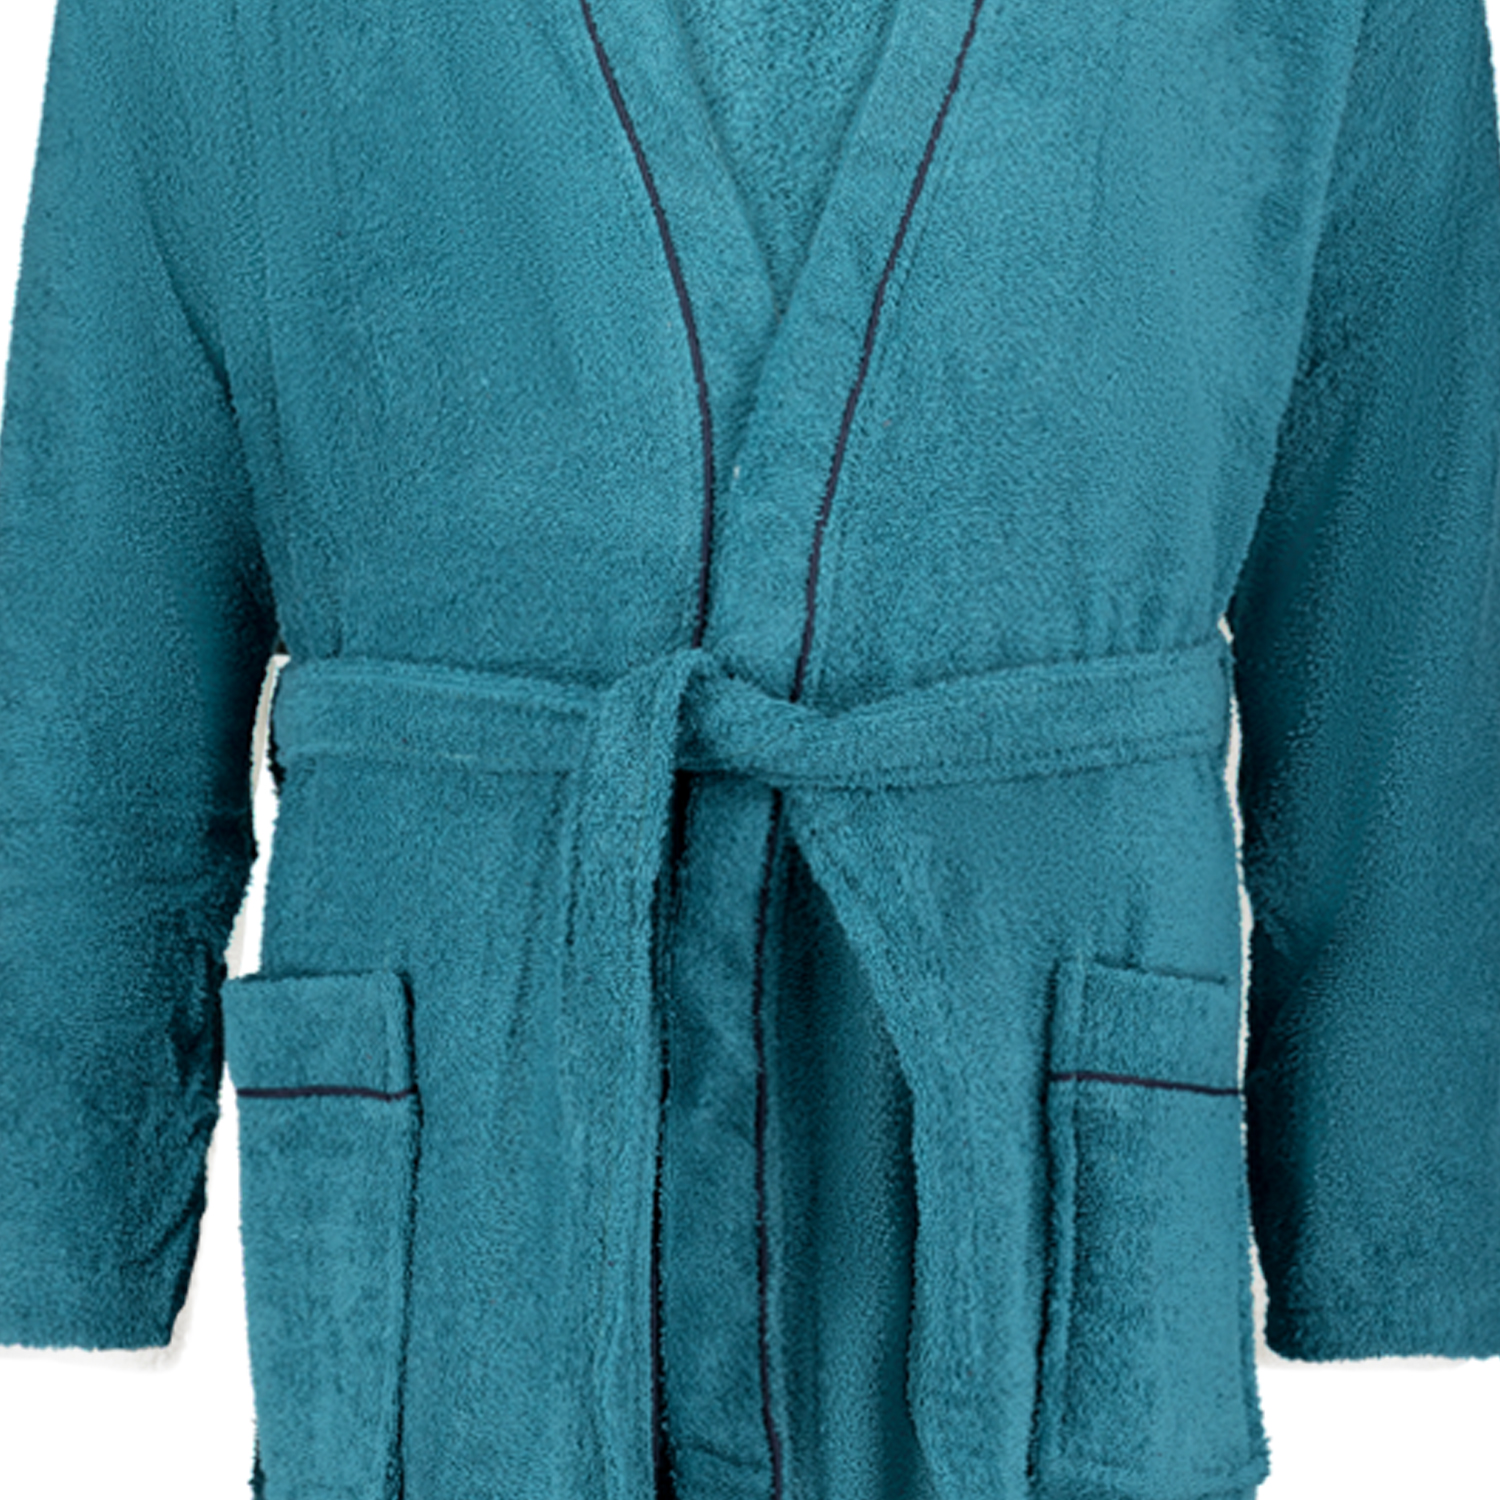 Bathrobe for men in petrol series JOEY by ADAMO up to oversize 12XL